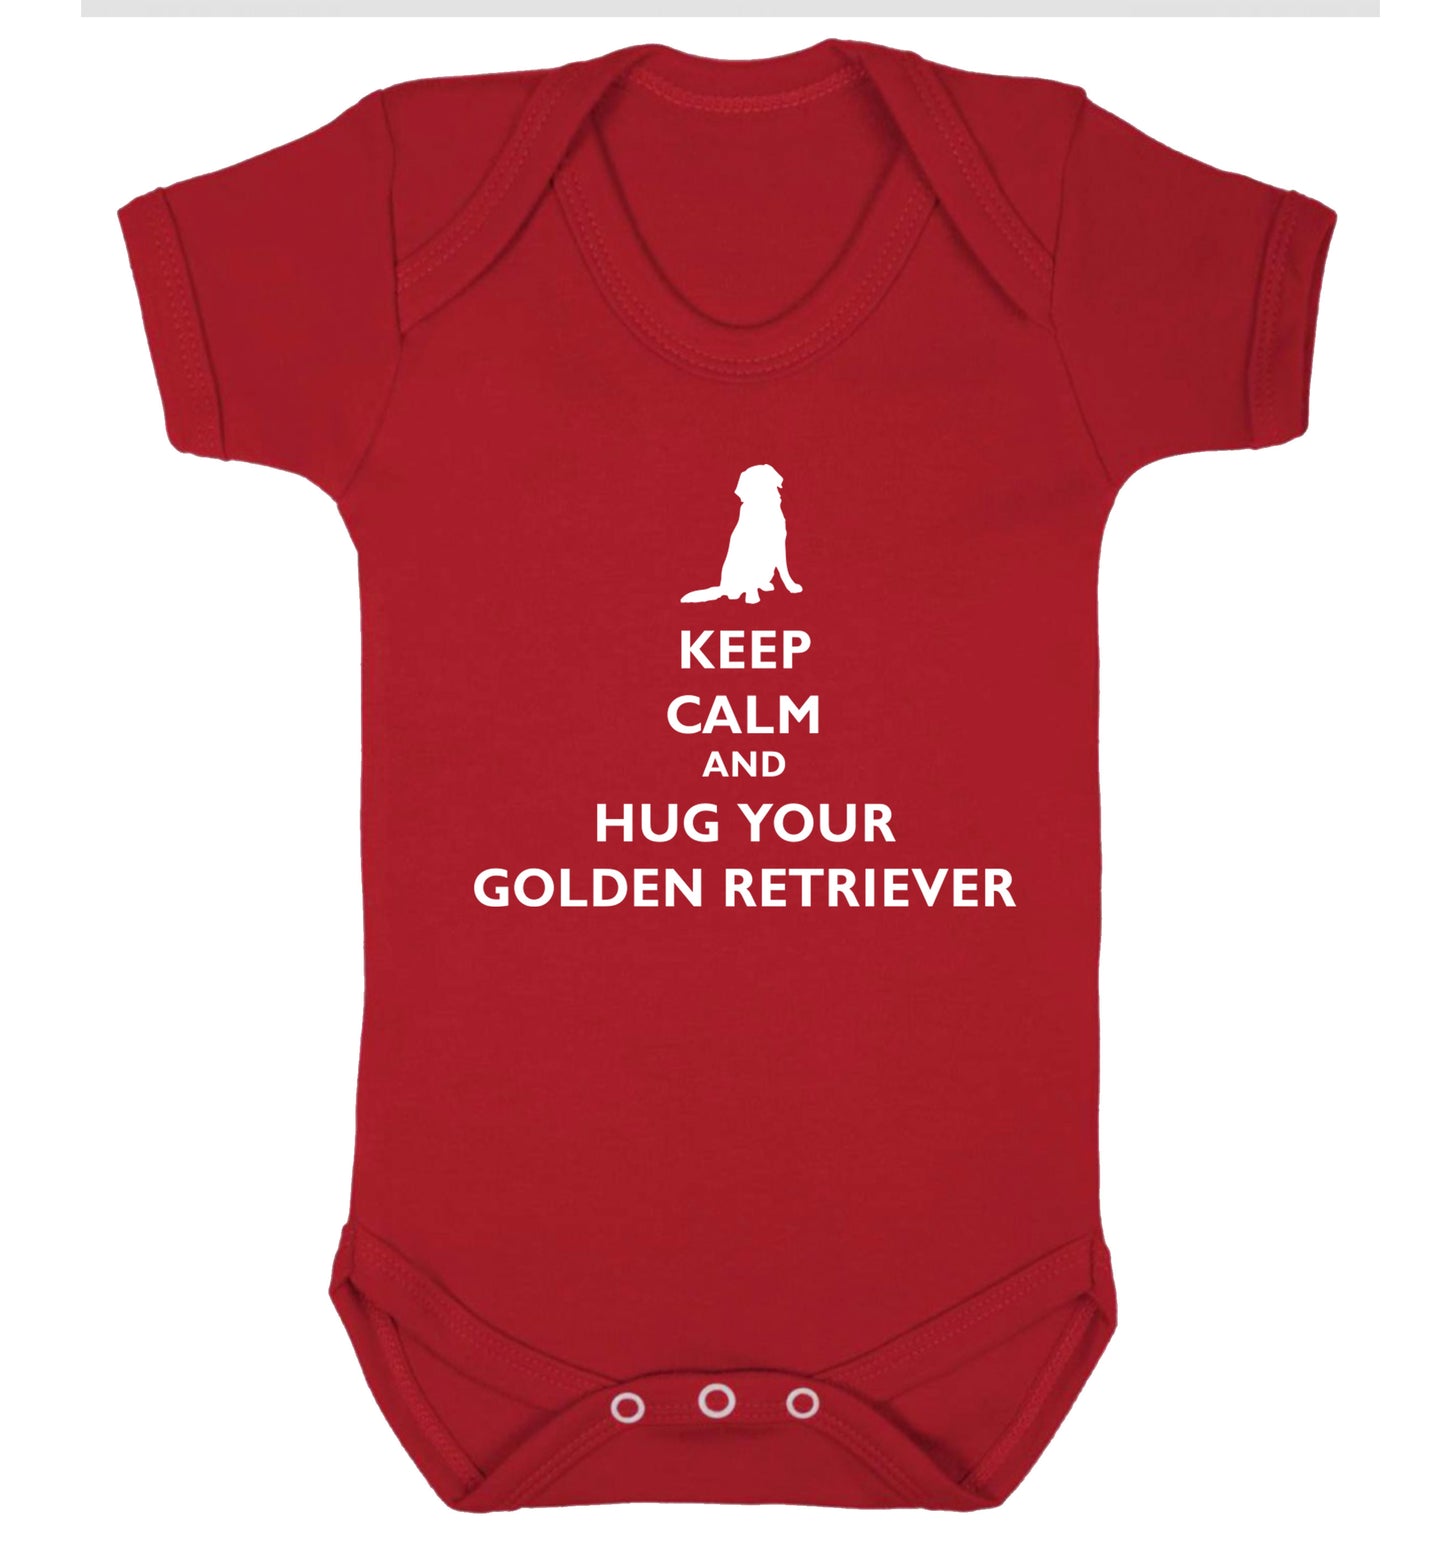 Keep calm and hug your golden retriever Baby Vest red 18-24 months